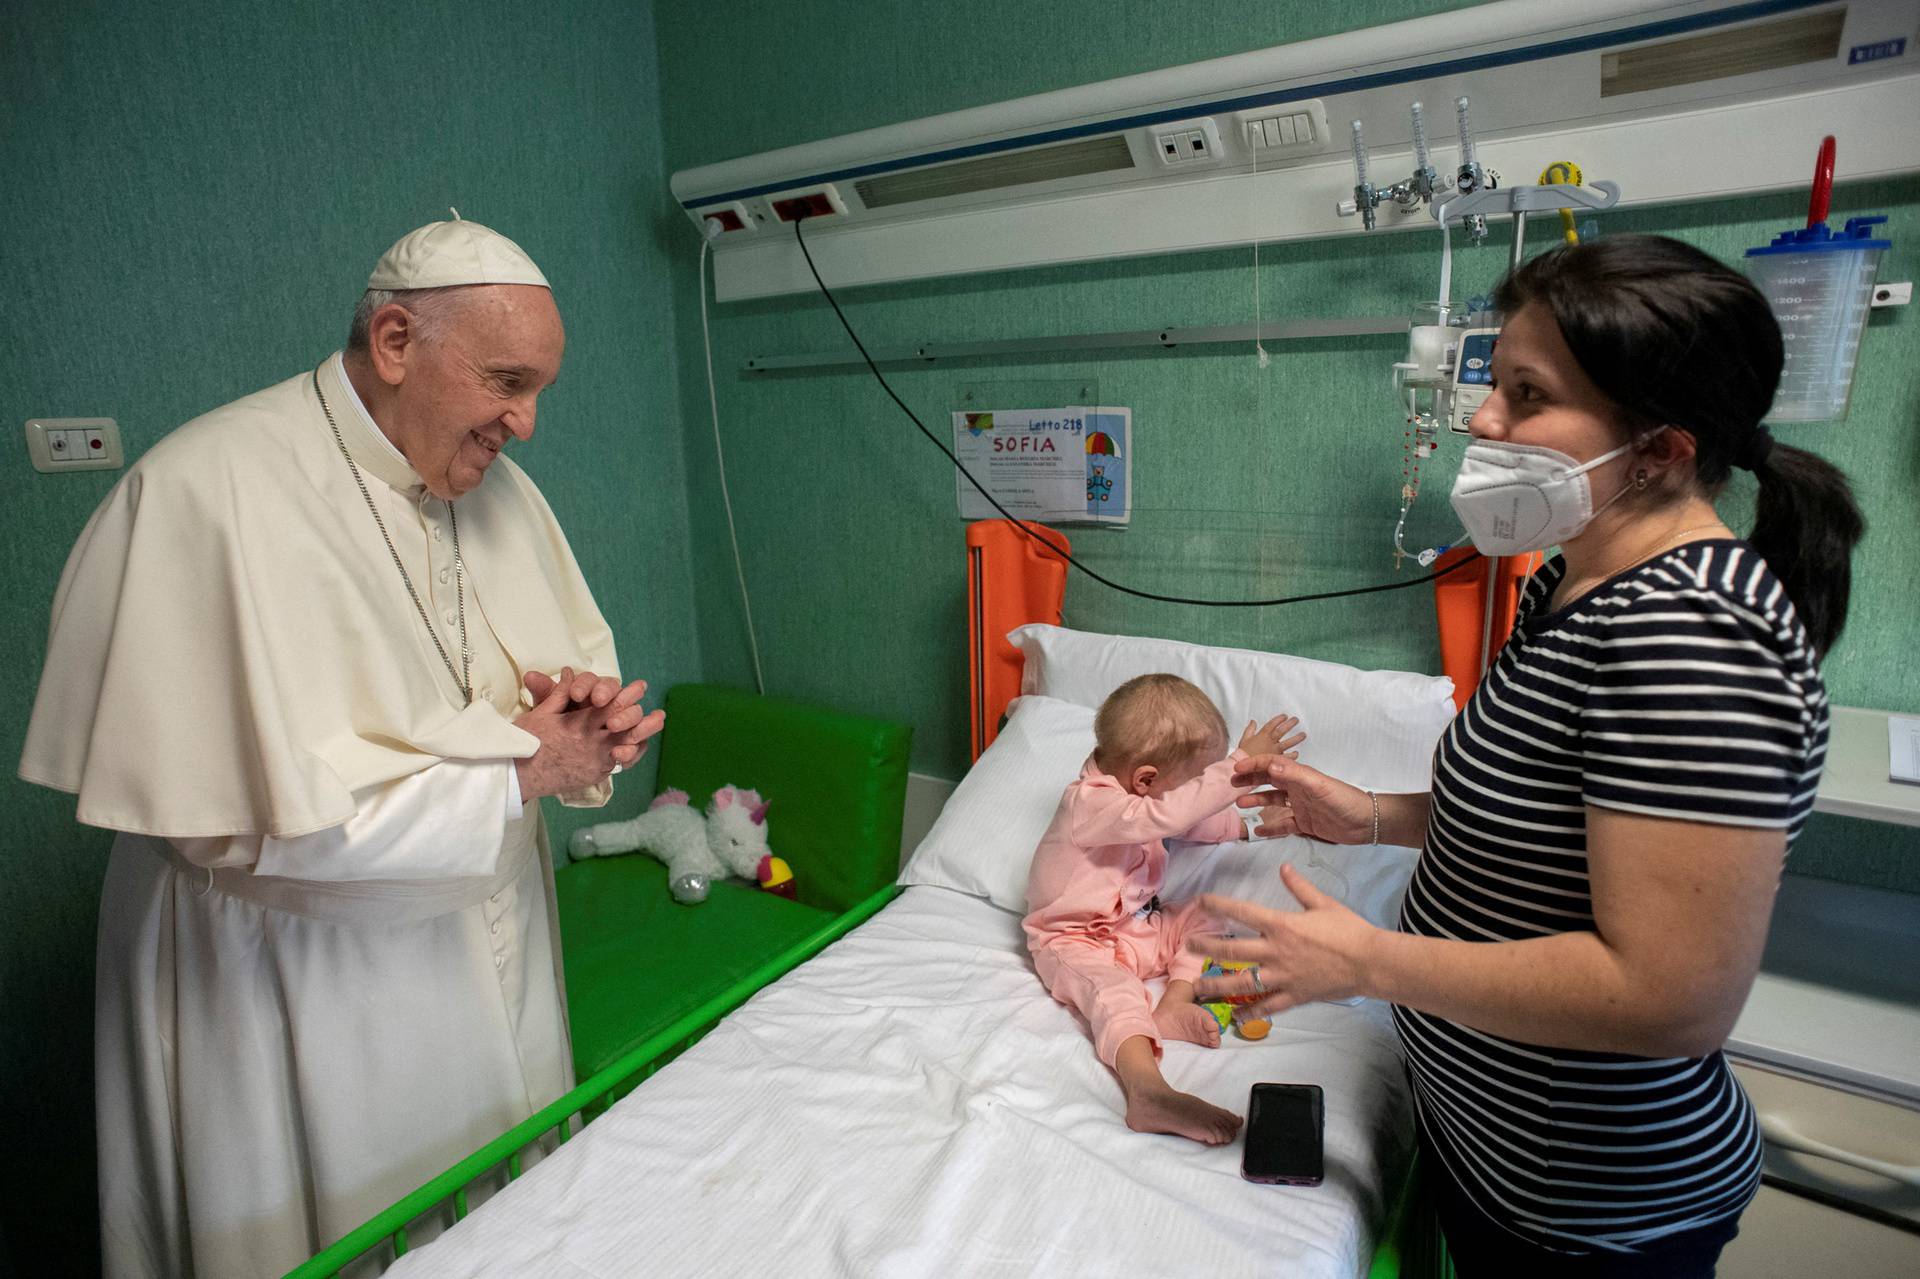 Pope Francis visits Bambino Gesu Pediatric Hospital to thank for caring for Ukrainian children